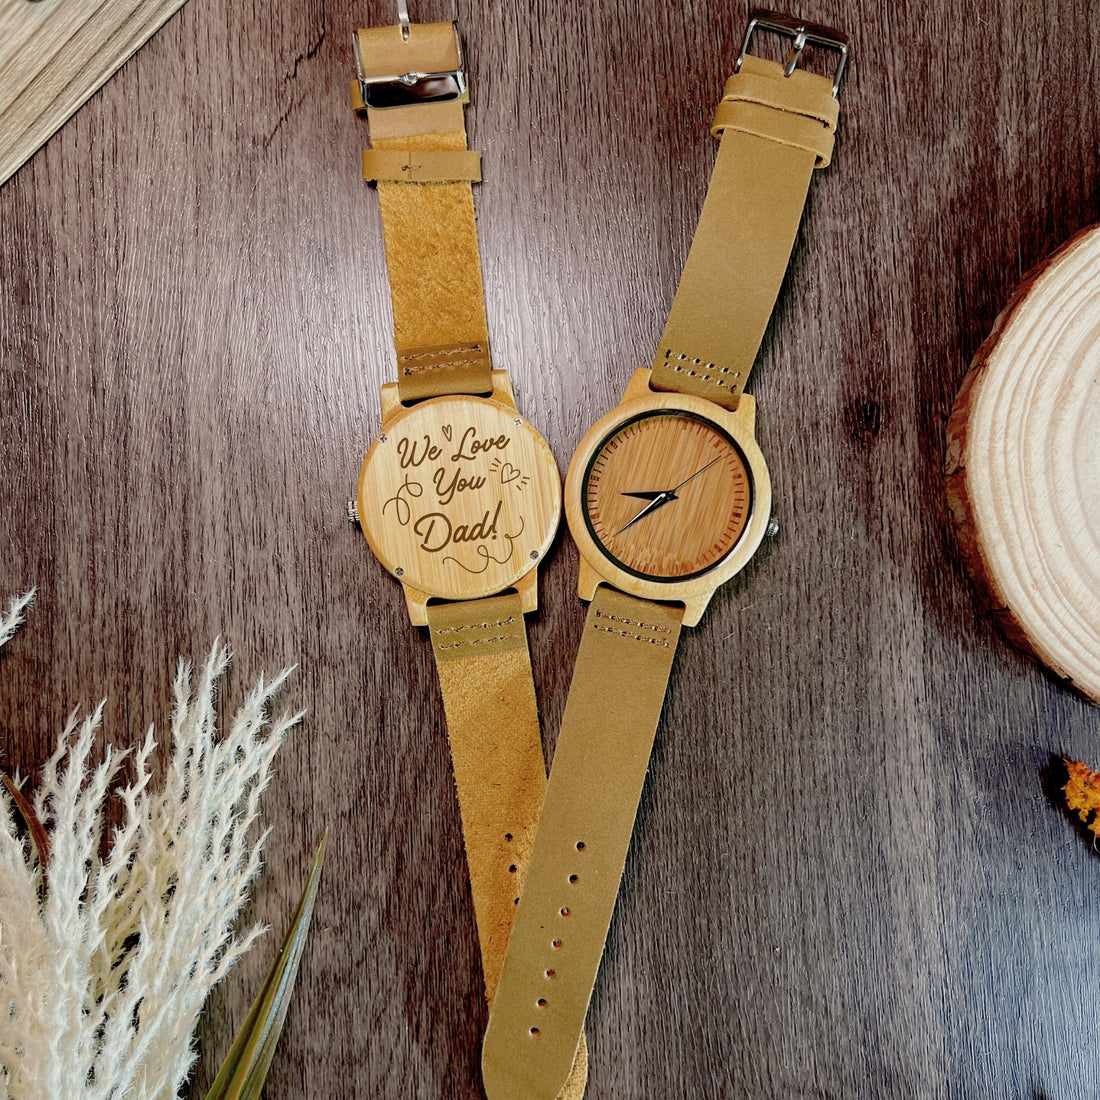 Personalised Bamboo Watch & Wooden Box Set, Custom Engraved Unisex Accessories/ Jewellery Storage, Groomsman/ Dad Mother Gift Wedding Favour